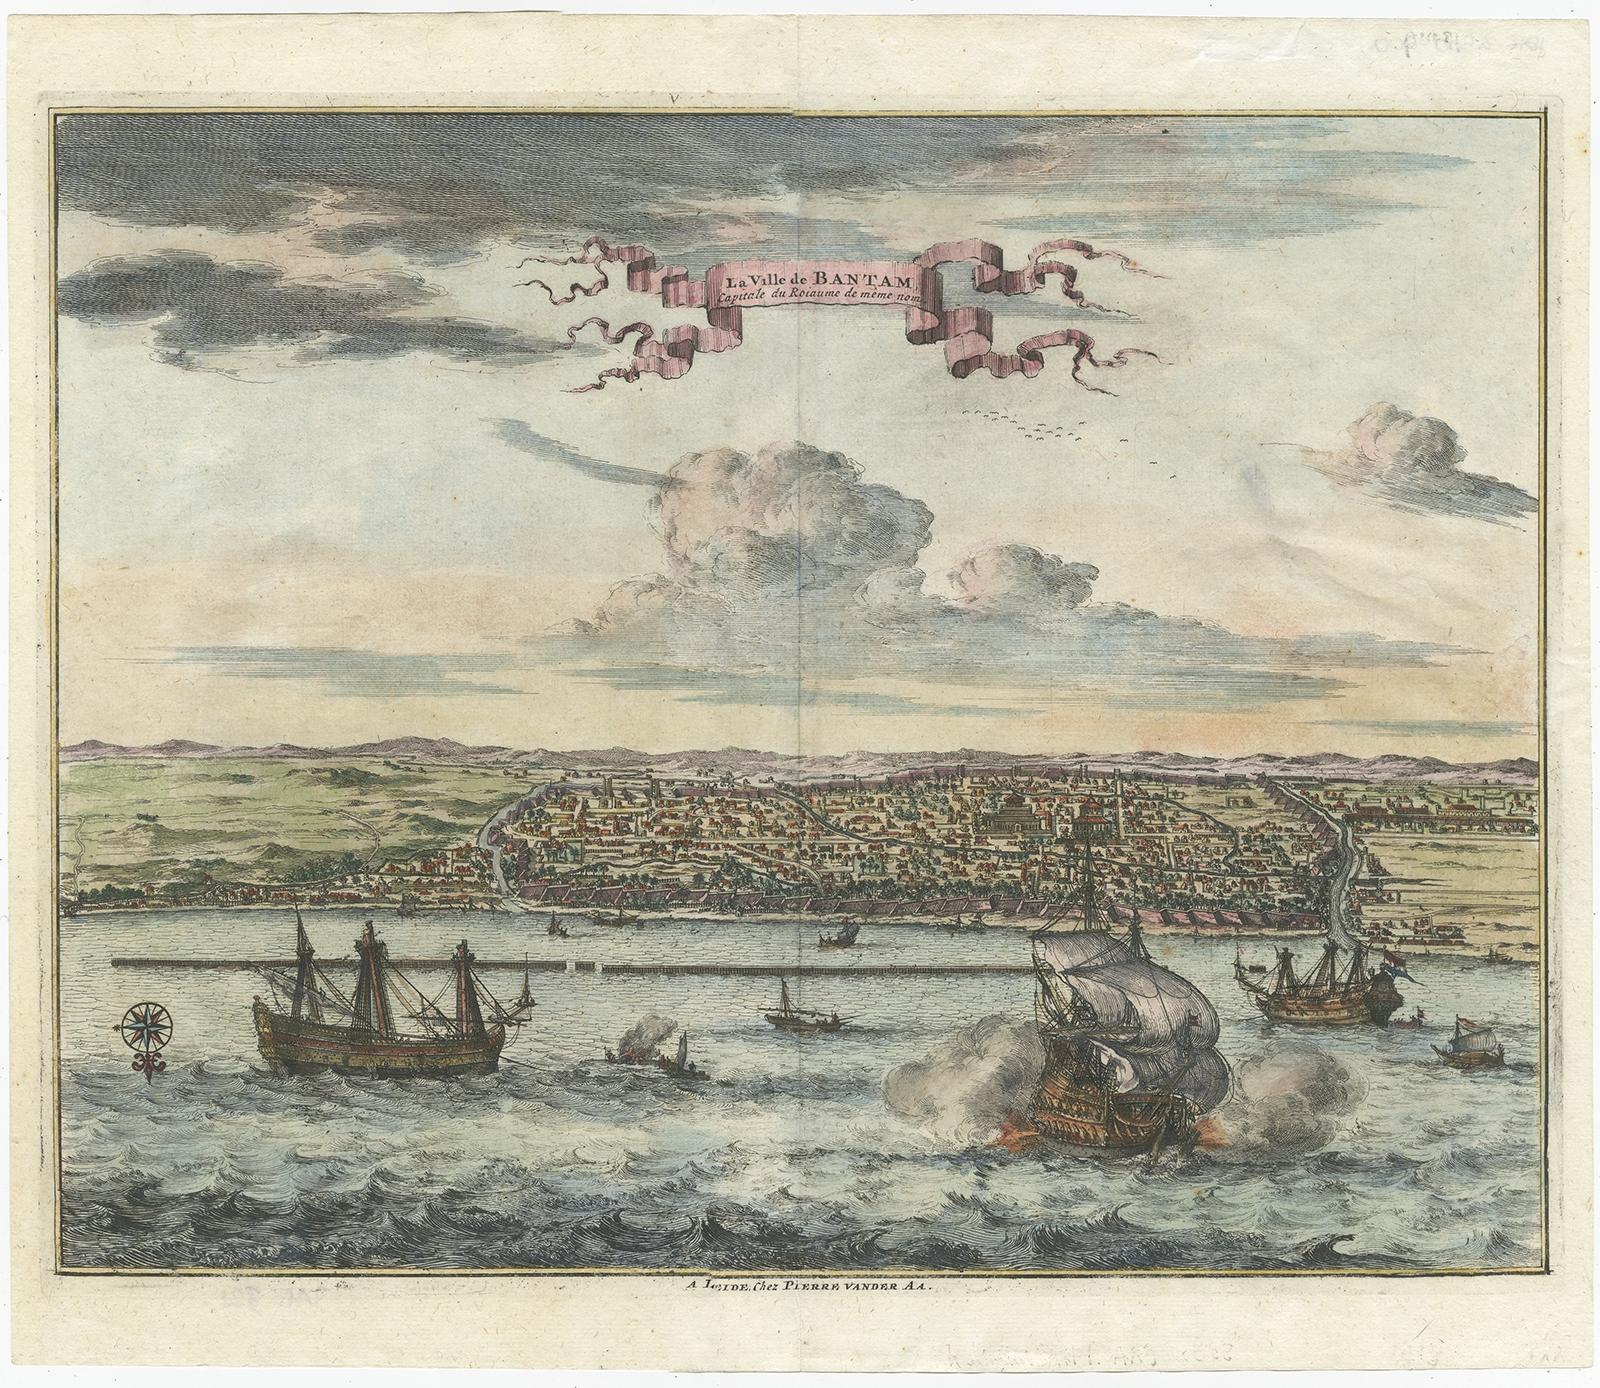 Antique print titled 'La Ville de Bantam capitale du Roiaume de meme nom'. 

A bird's eye view of the city Banten or Bantam near the western end of Java in Indonesia. Several tall ships and smaller nautical vessels in the harbour. This print